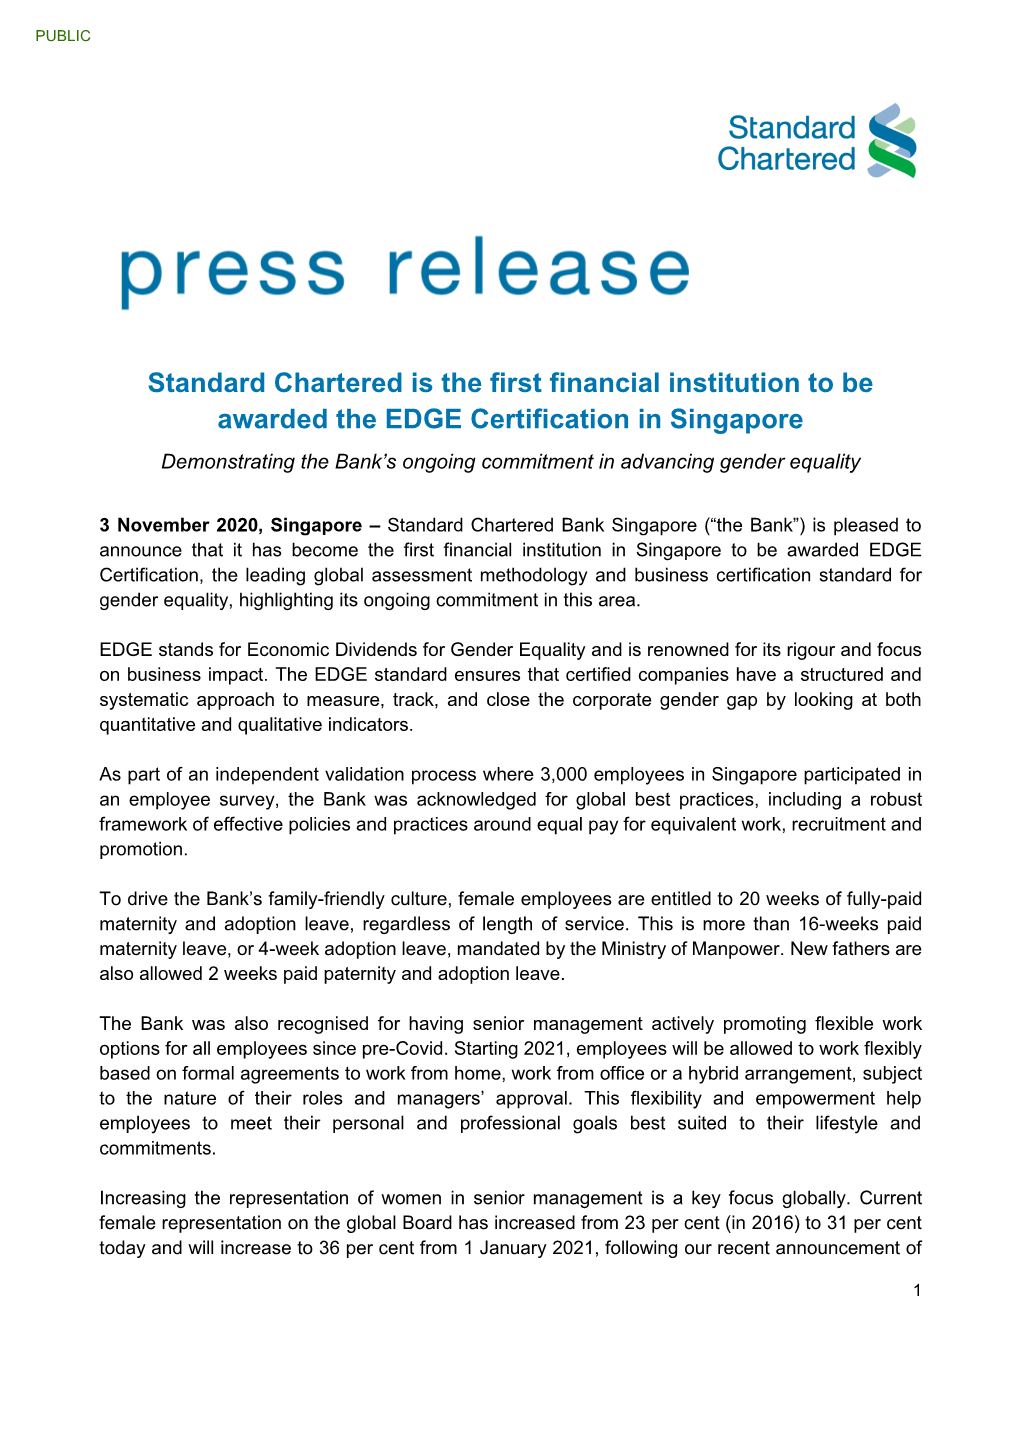 Standard Chartered Is the First Financial Institution to Be Awarded